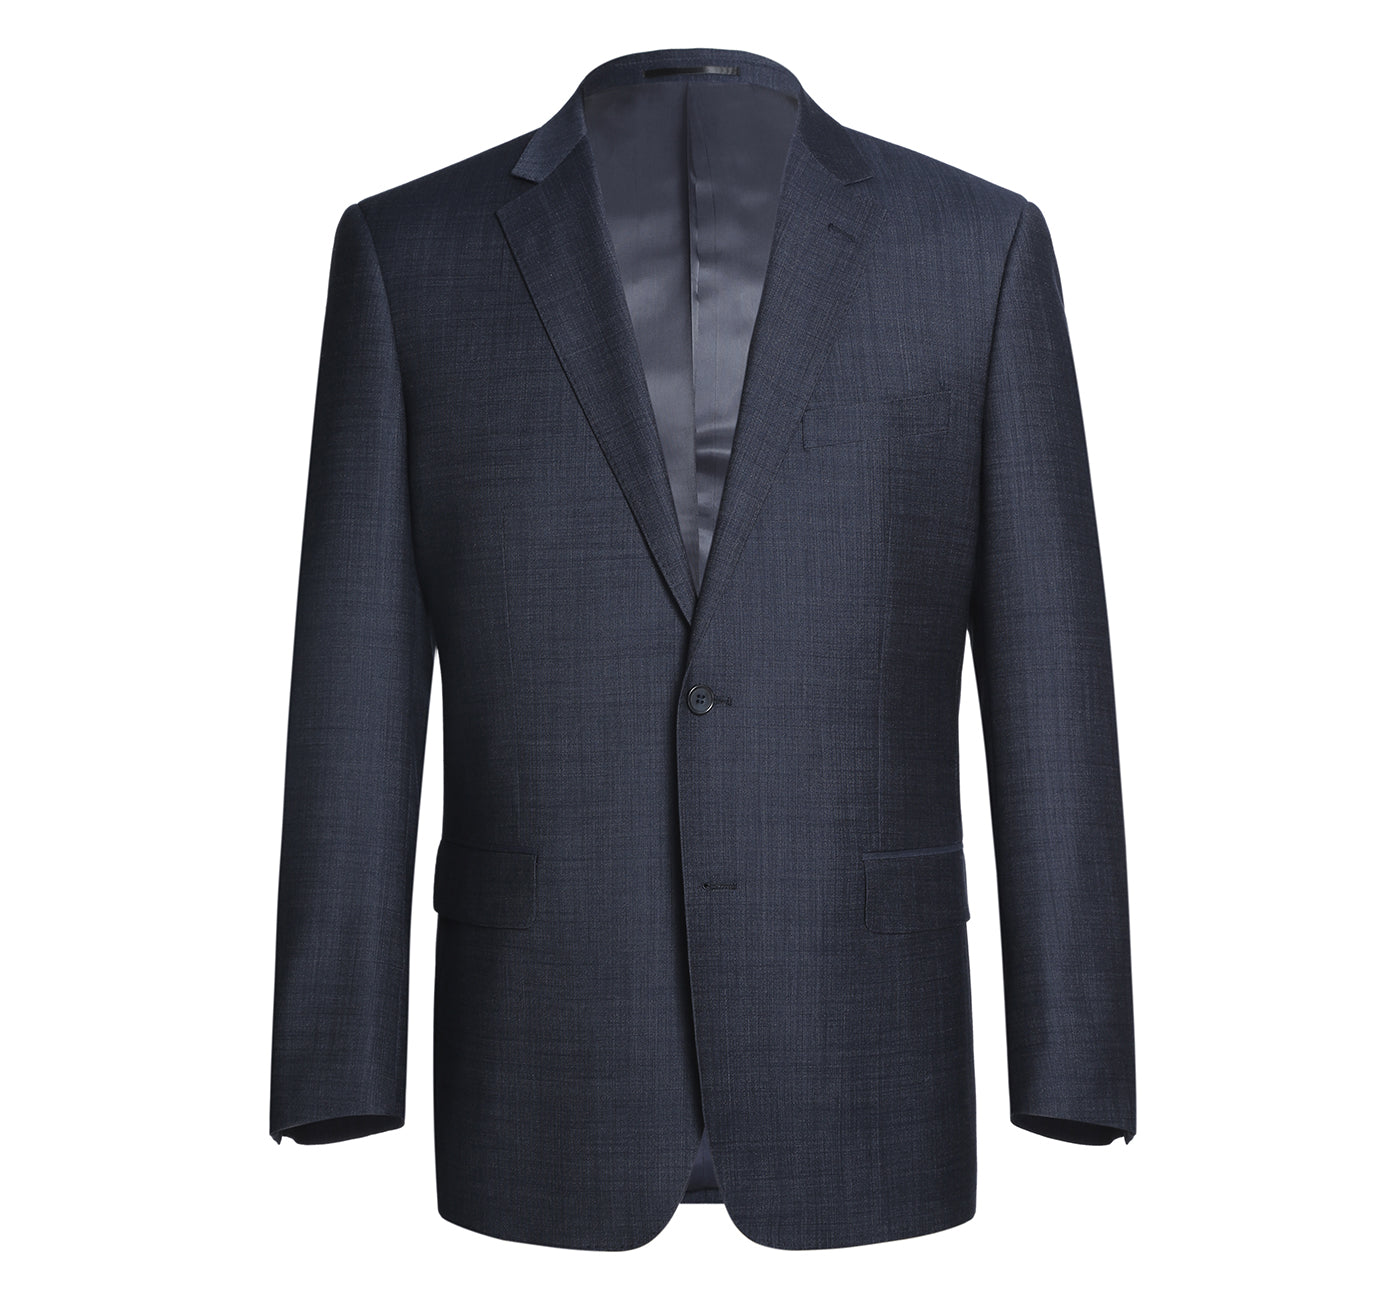 558-3 Men's Two Piece Classic Fit Navy Textured Wool Blend Suit